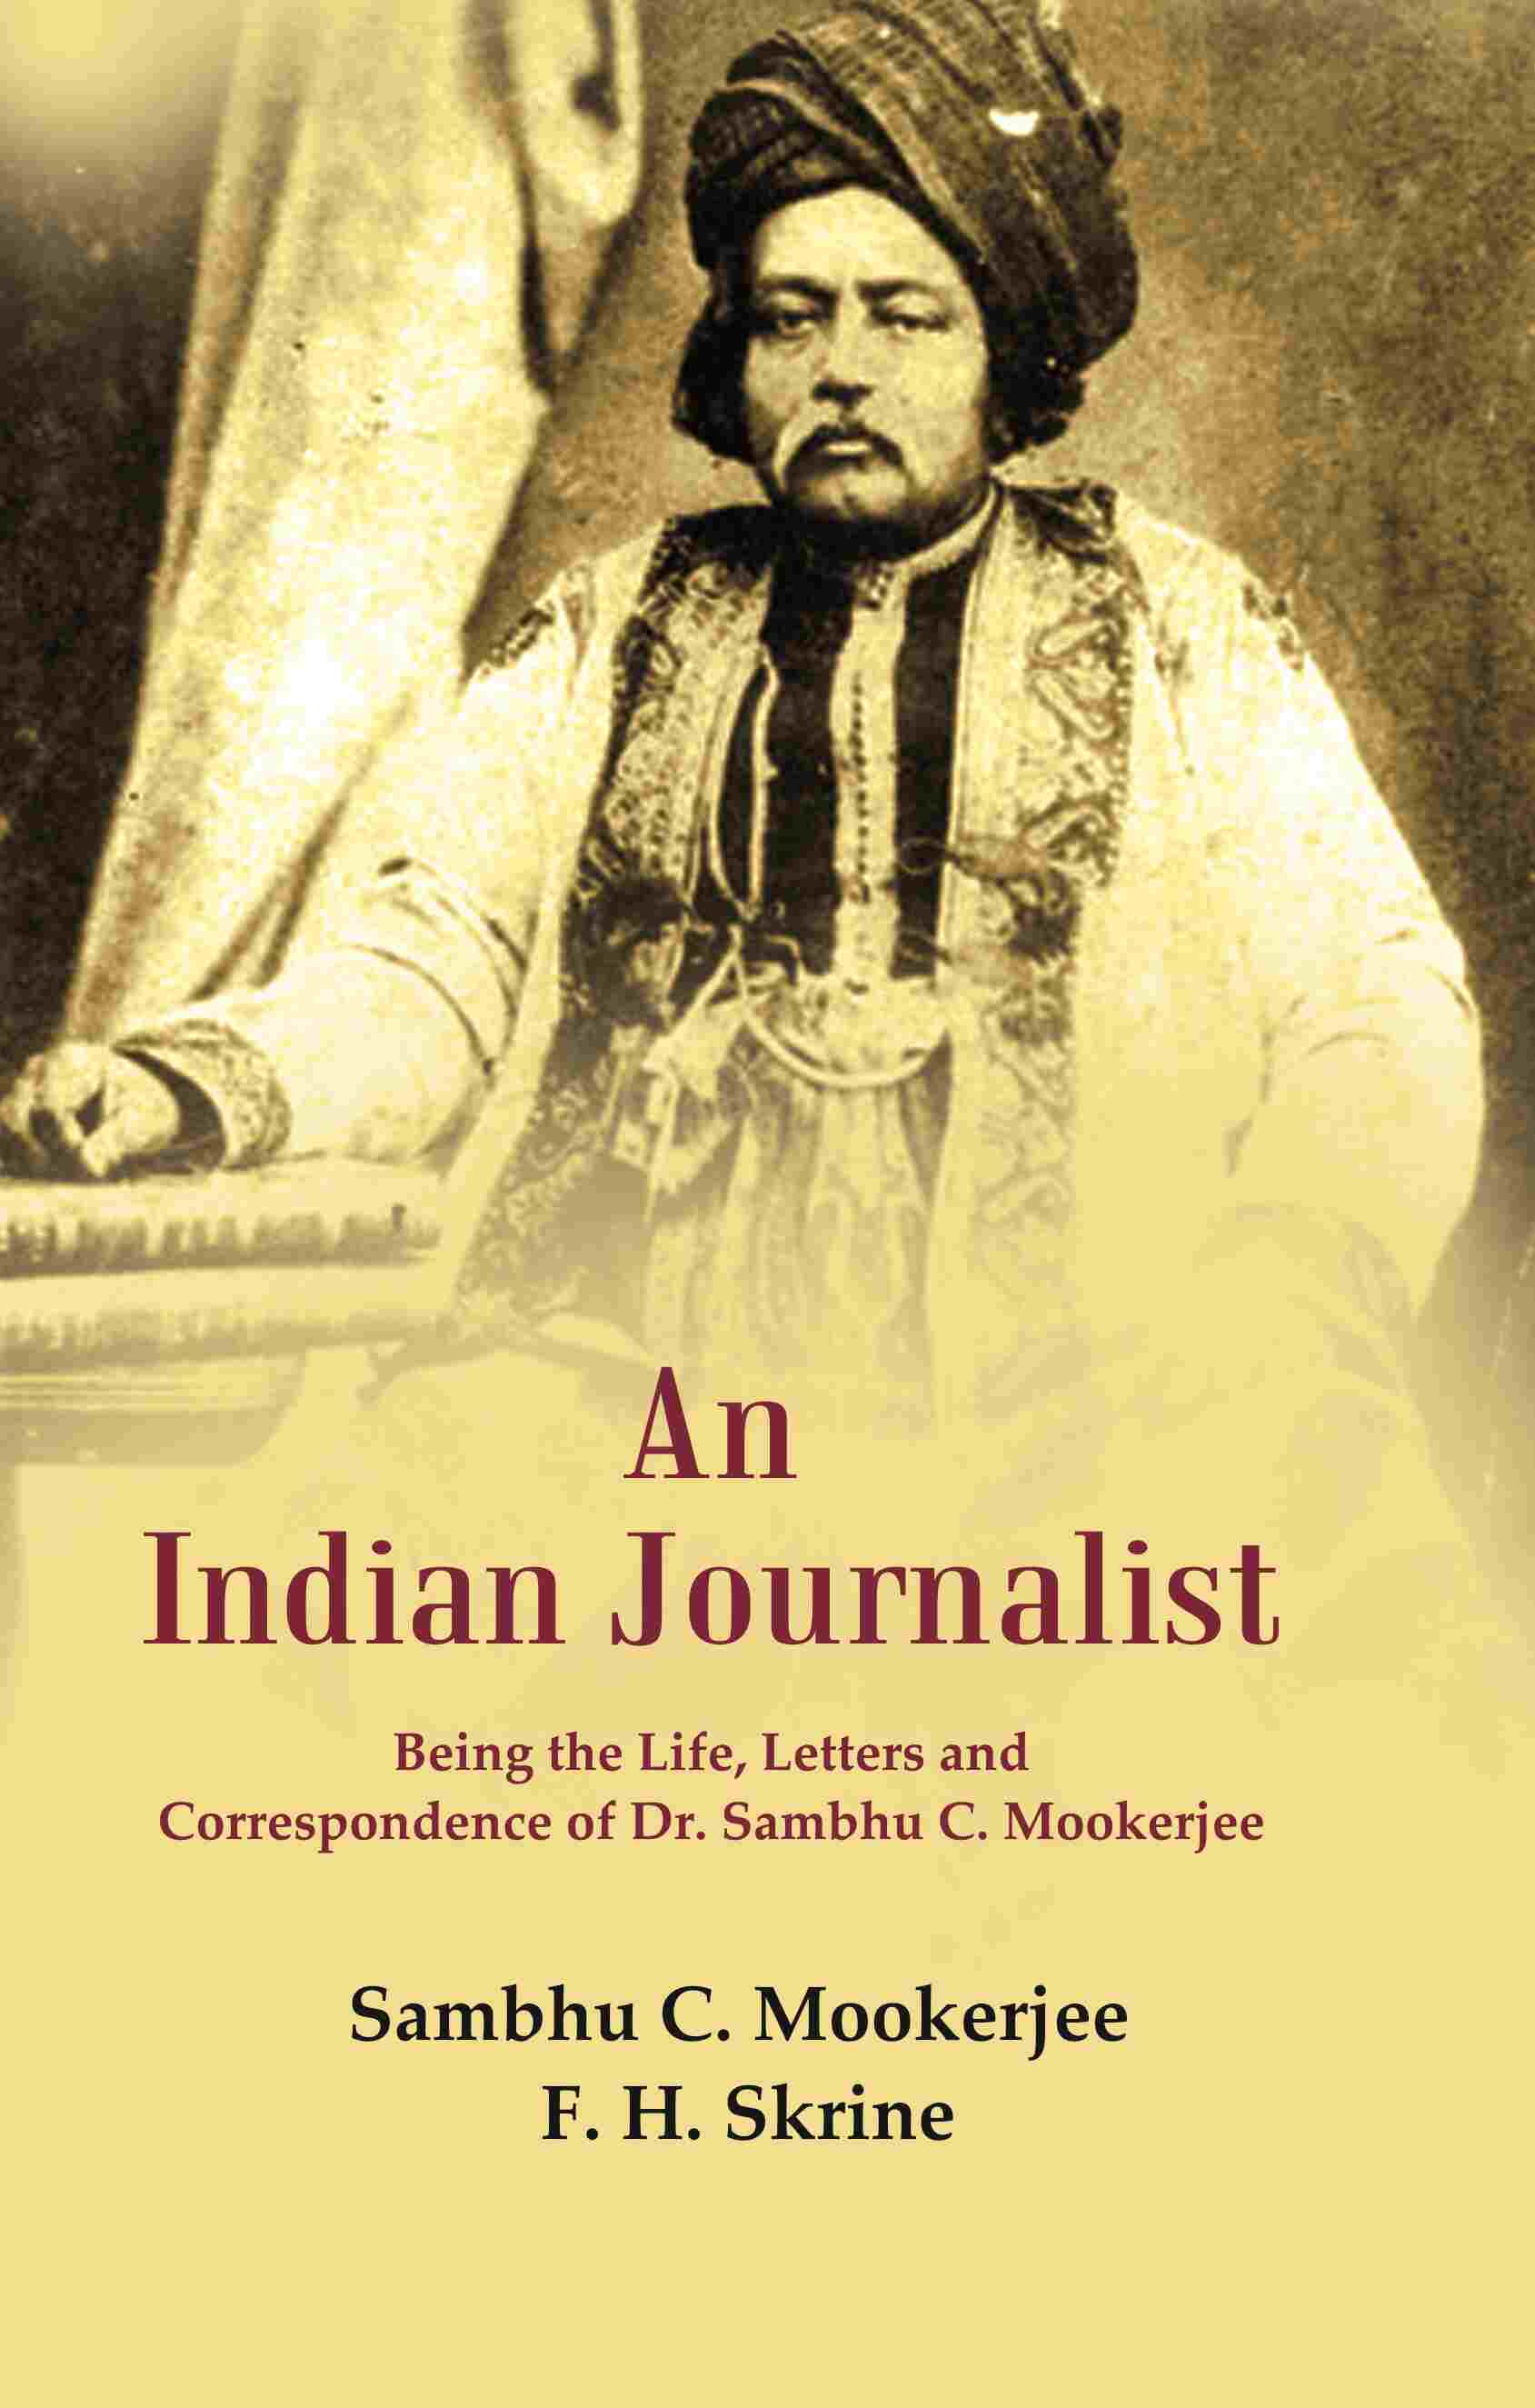 An Indian Journalist: Being the Life, Letters and Correspondence of Dr. Sambhu C. Mookerjee